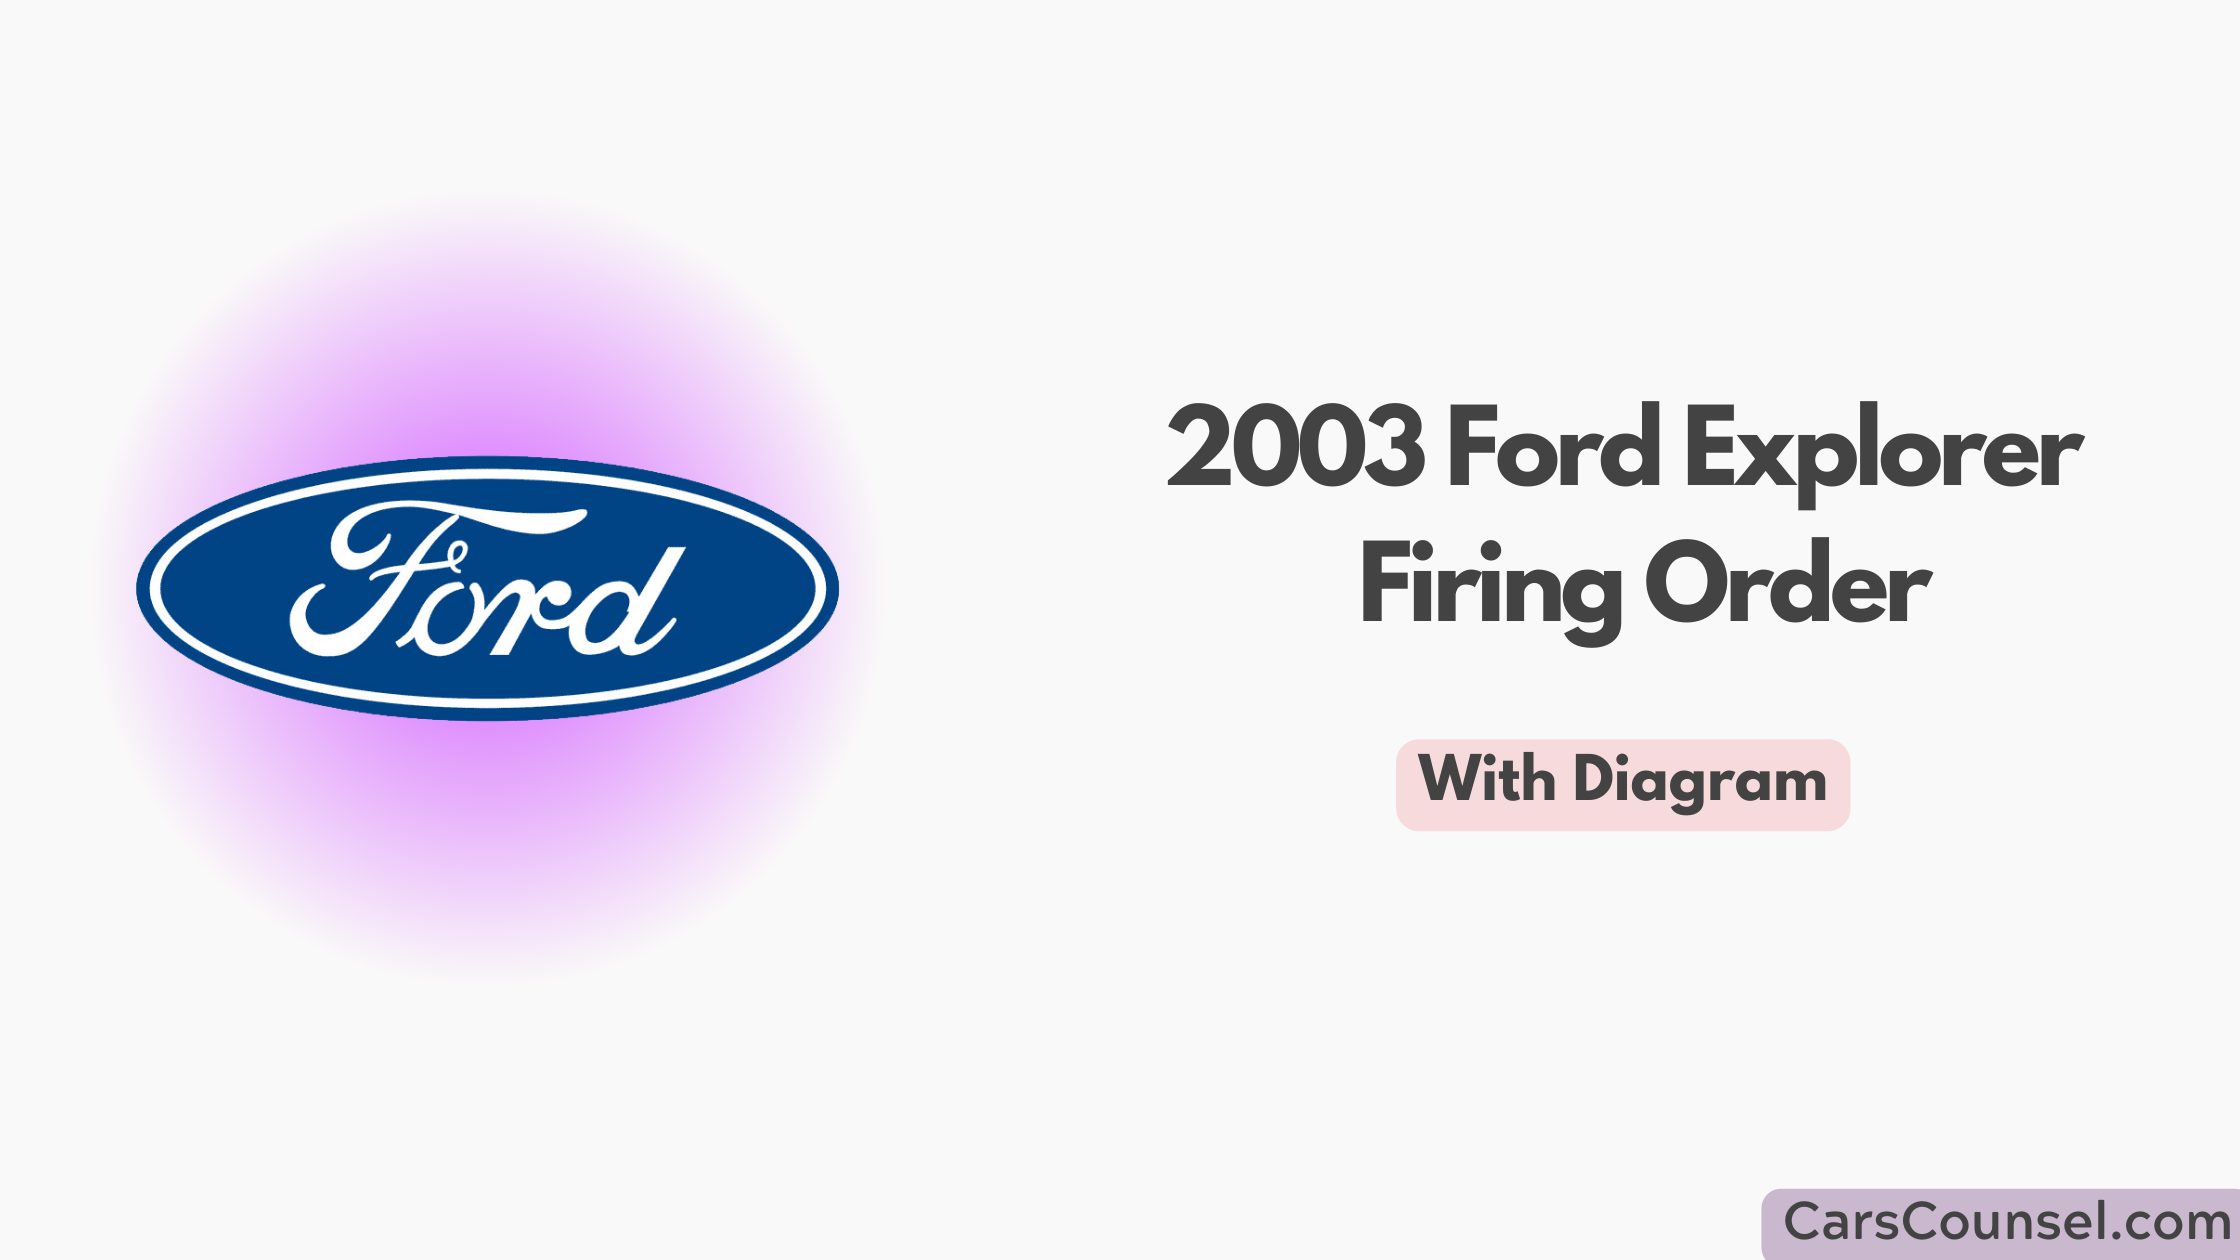 2003 Ford Explorer Firing Order With Diagram